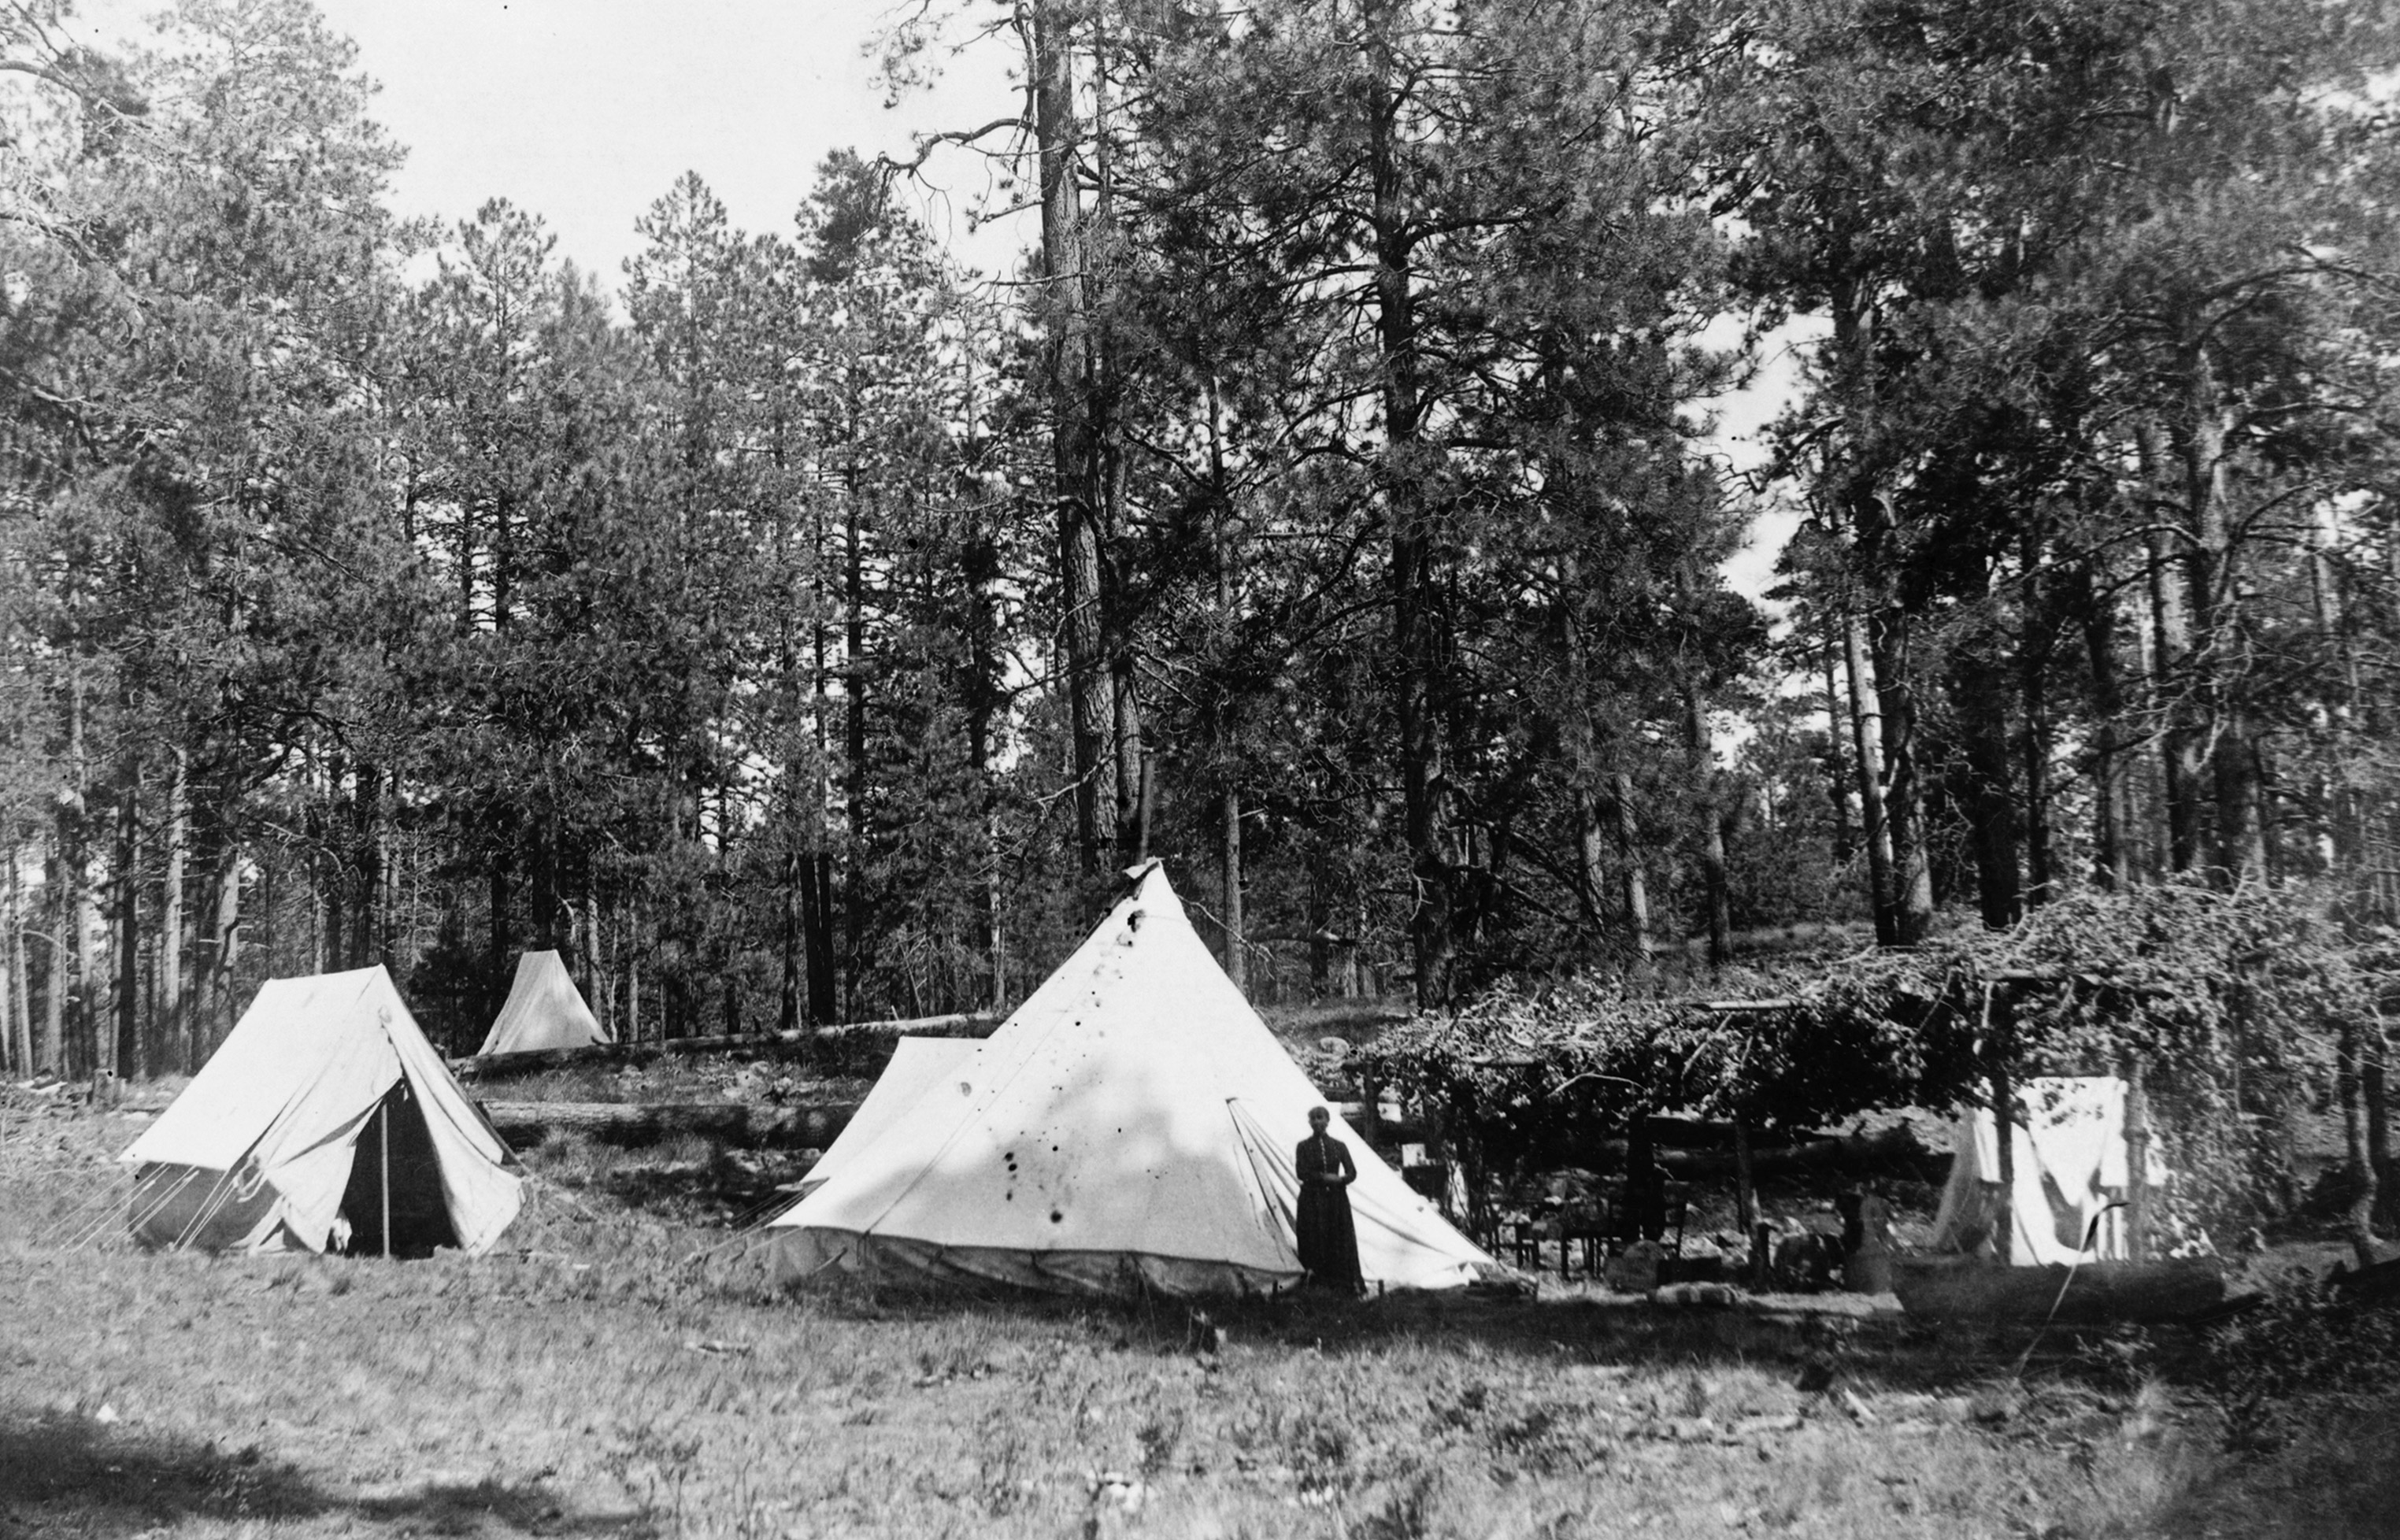 tents pitched in a grassy field surrounded by trees